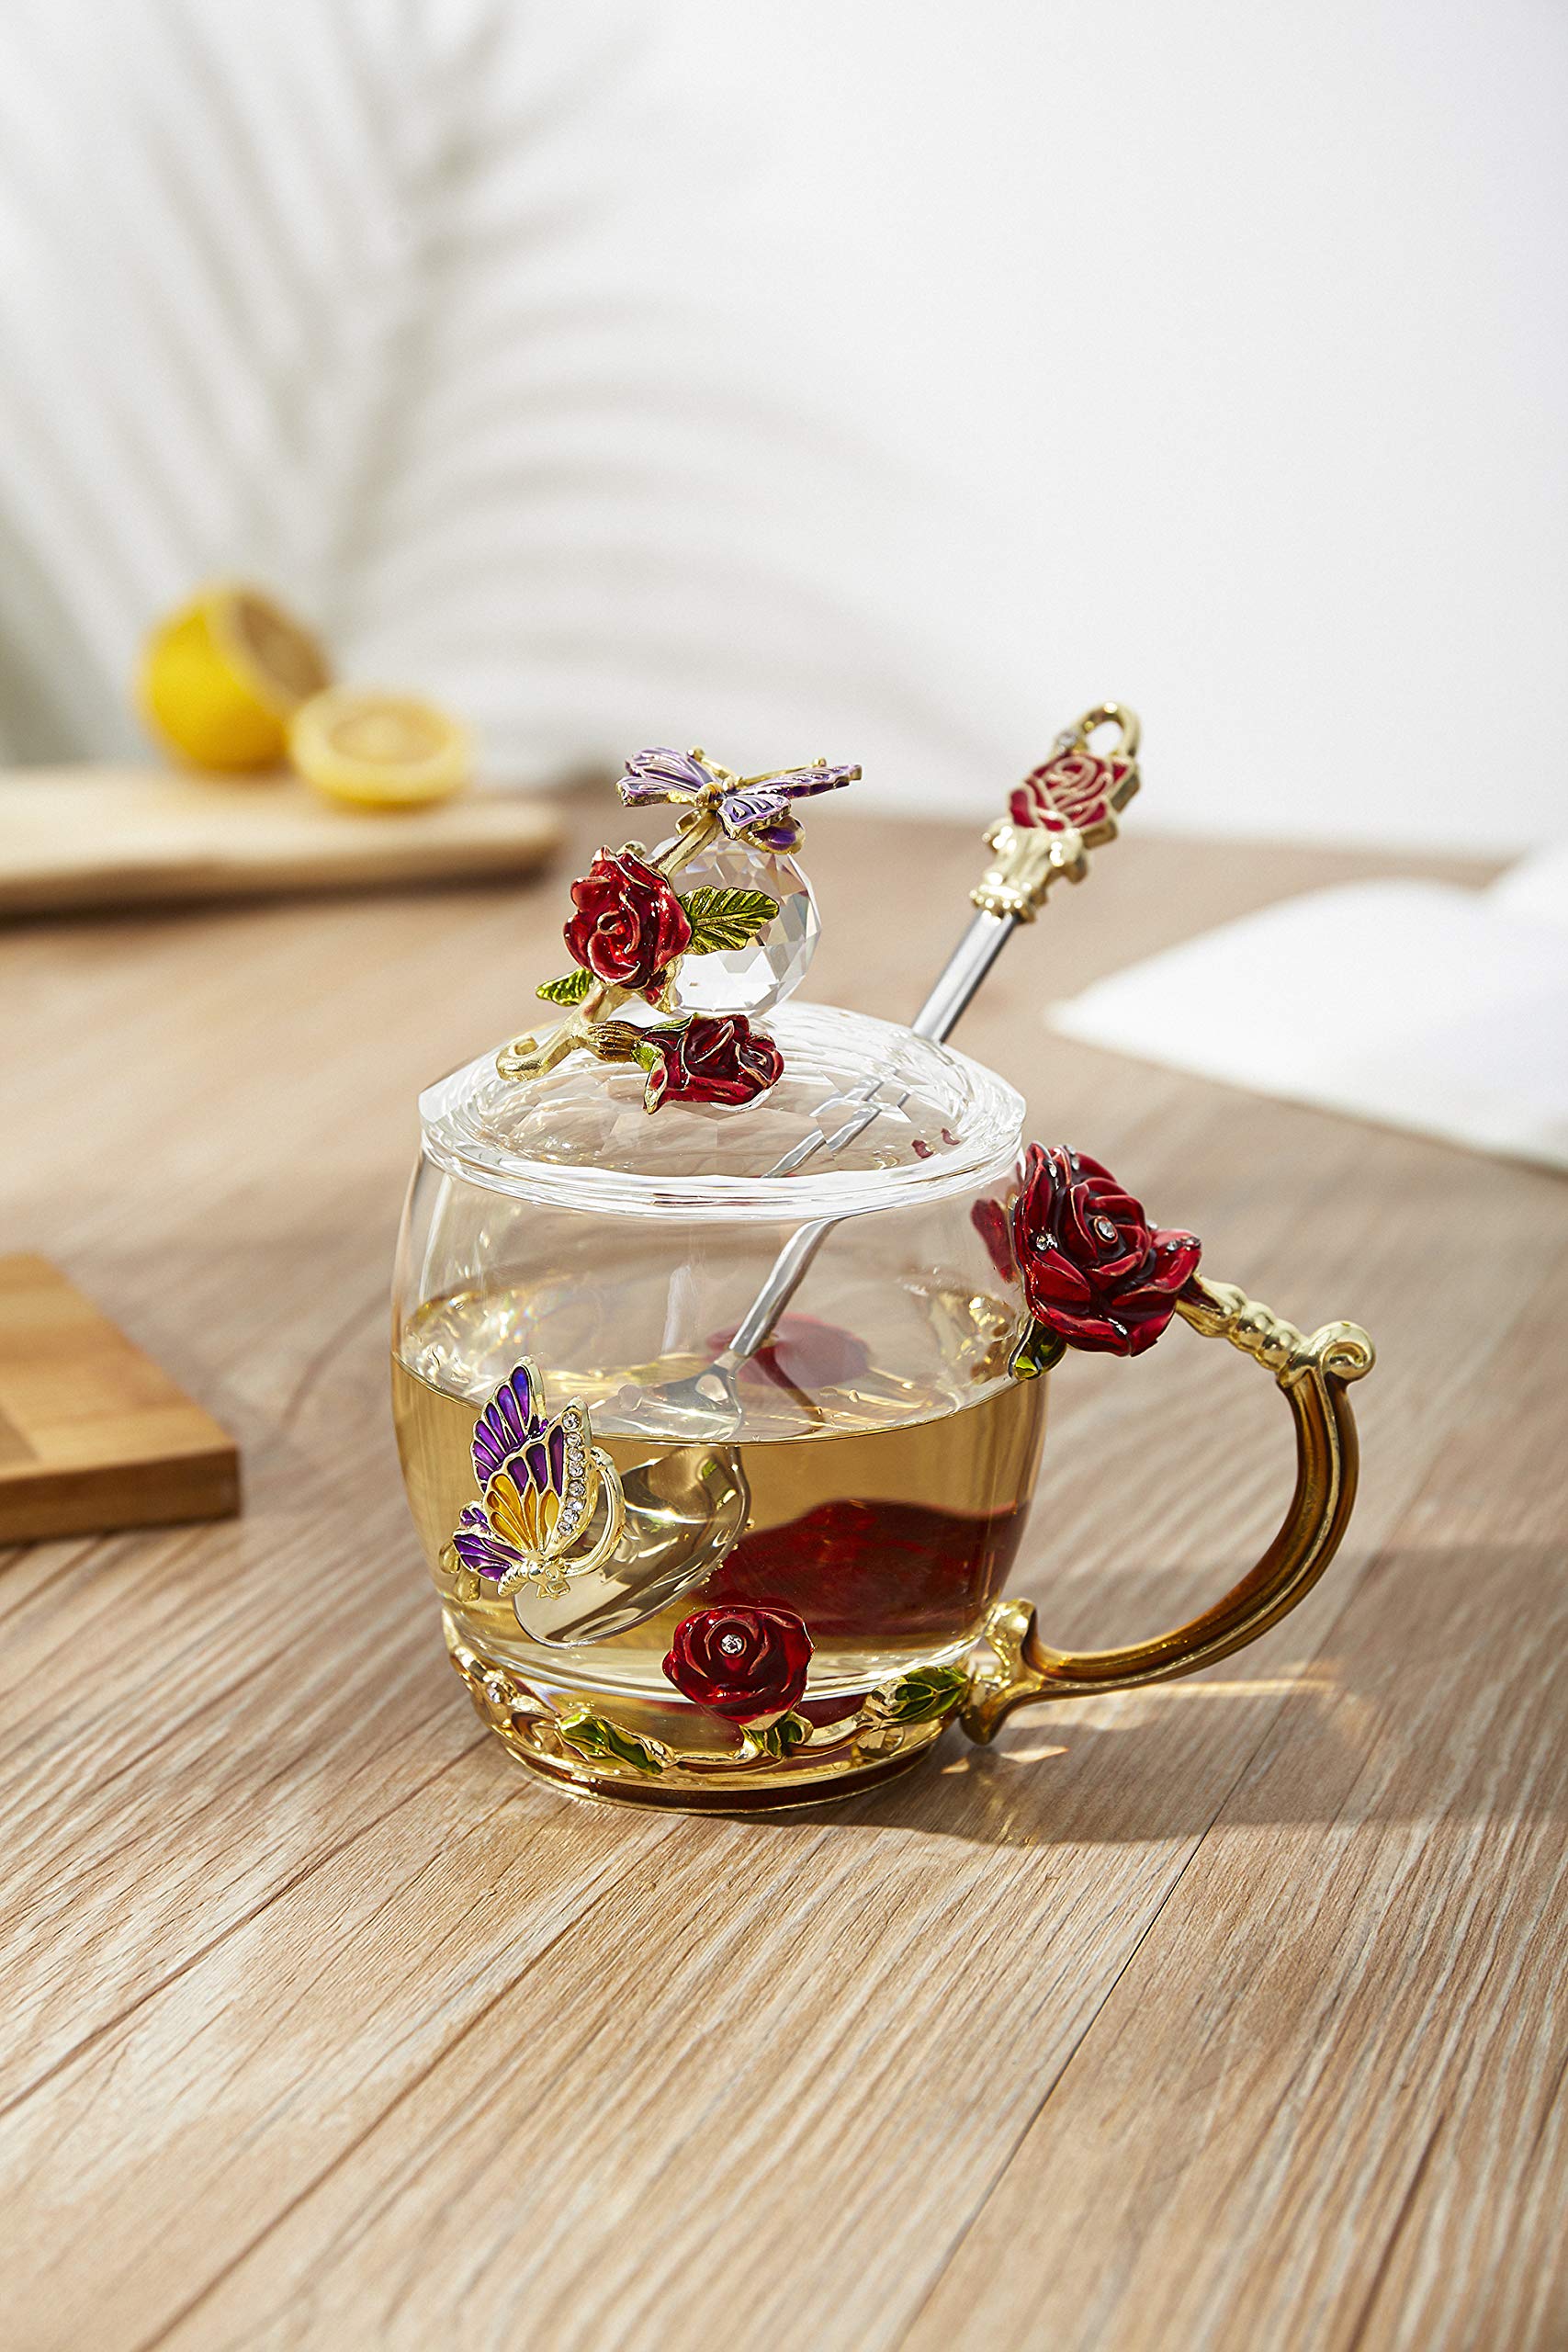 Guon-Wuvl Flower Teacup Transparent Glass Teacup, (With Spoon + Lid), Fancy Tea Cups, Flower Tea Cup,Tea Cup Gift, Gifts for Women,Mother's Day Present，Gift Box. (Rose Red Short Cup)